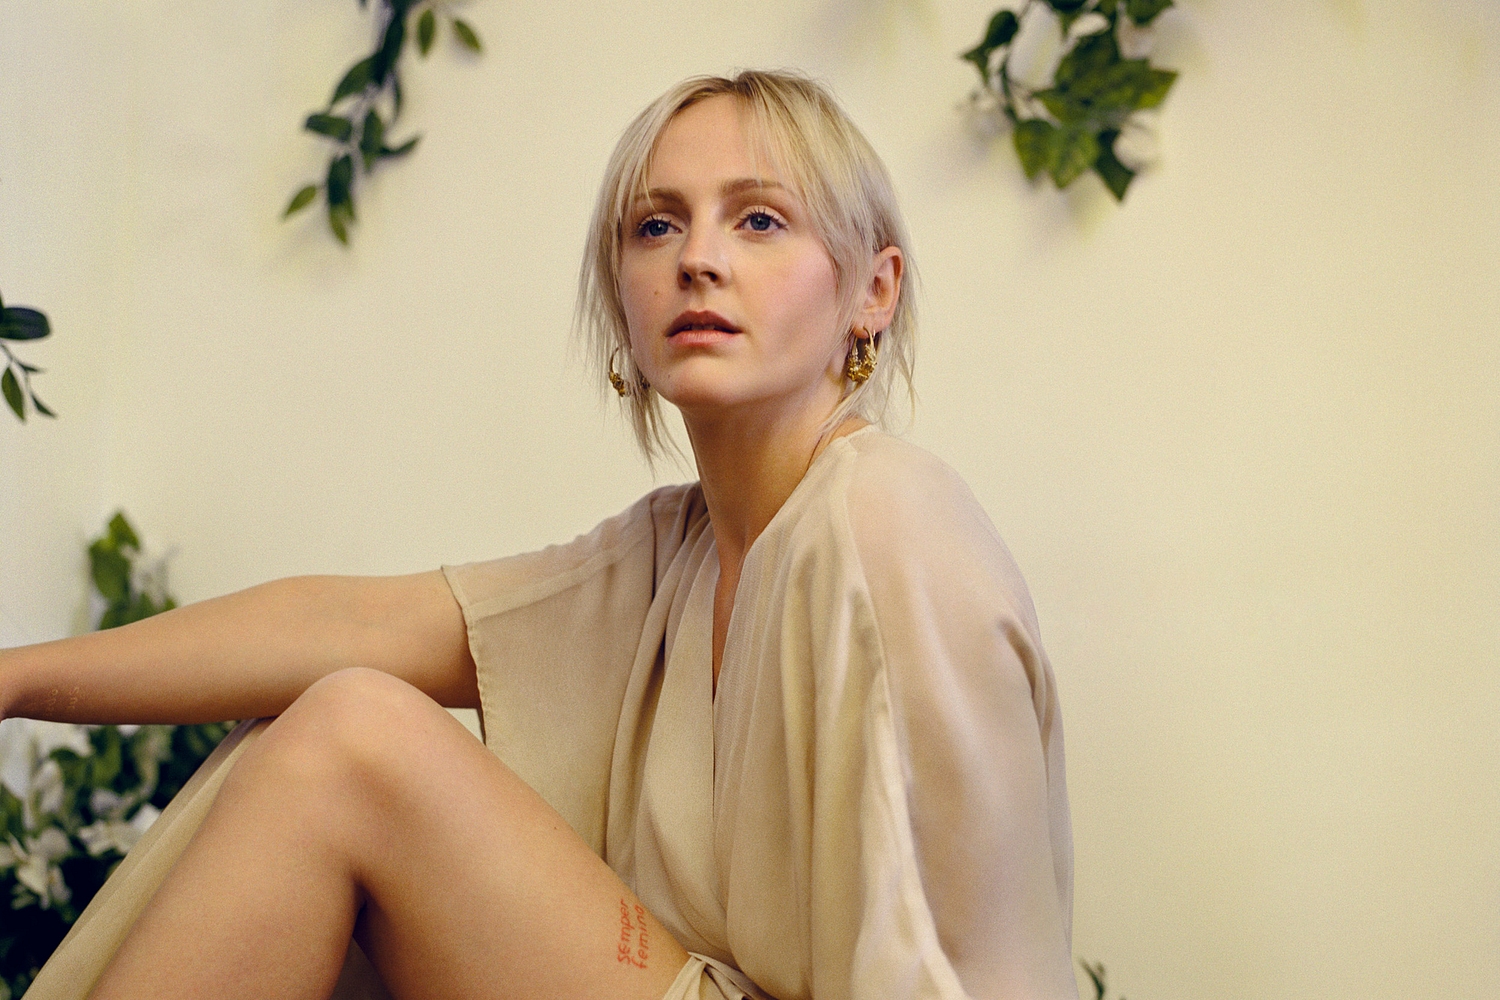 Laura Marling played brand new tracks for ‘A Prairie Home Companion’